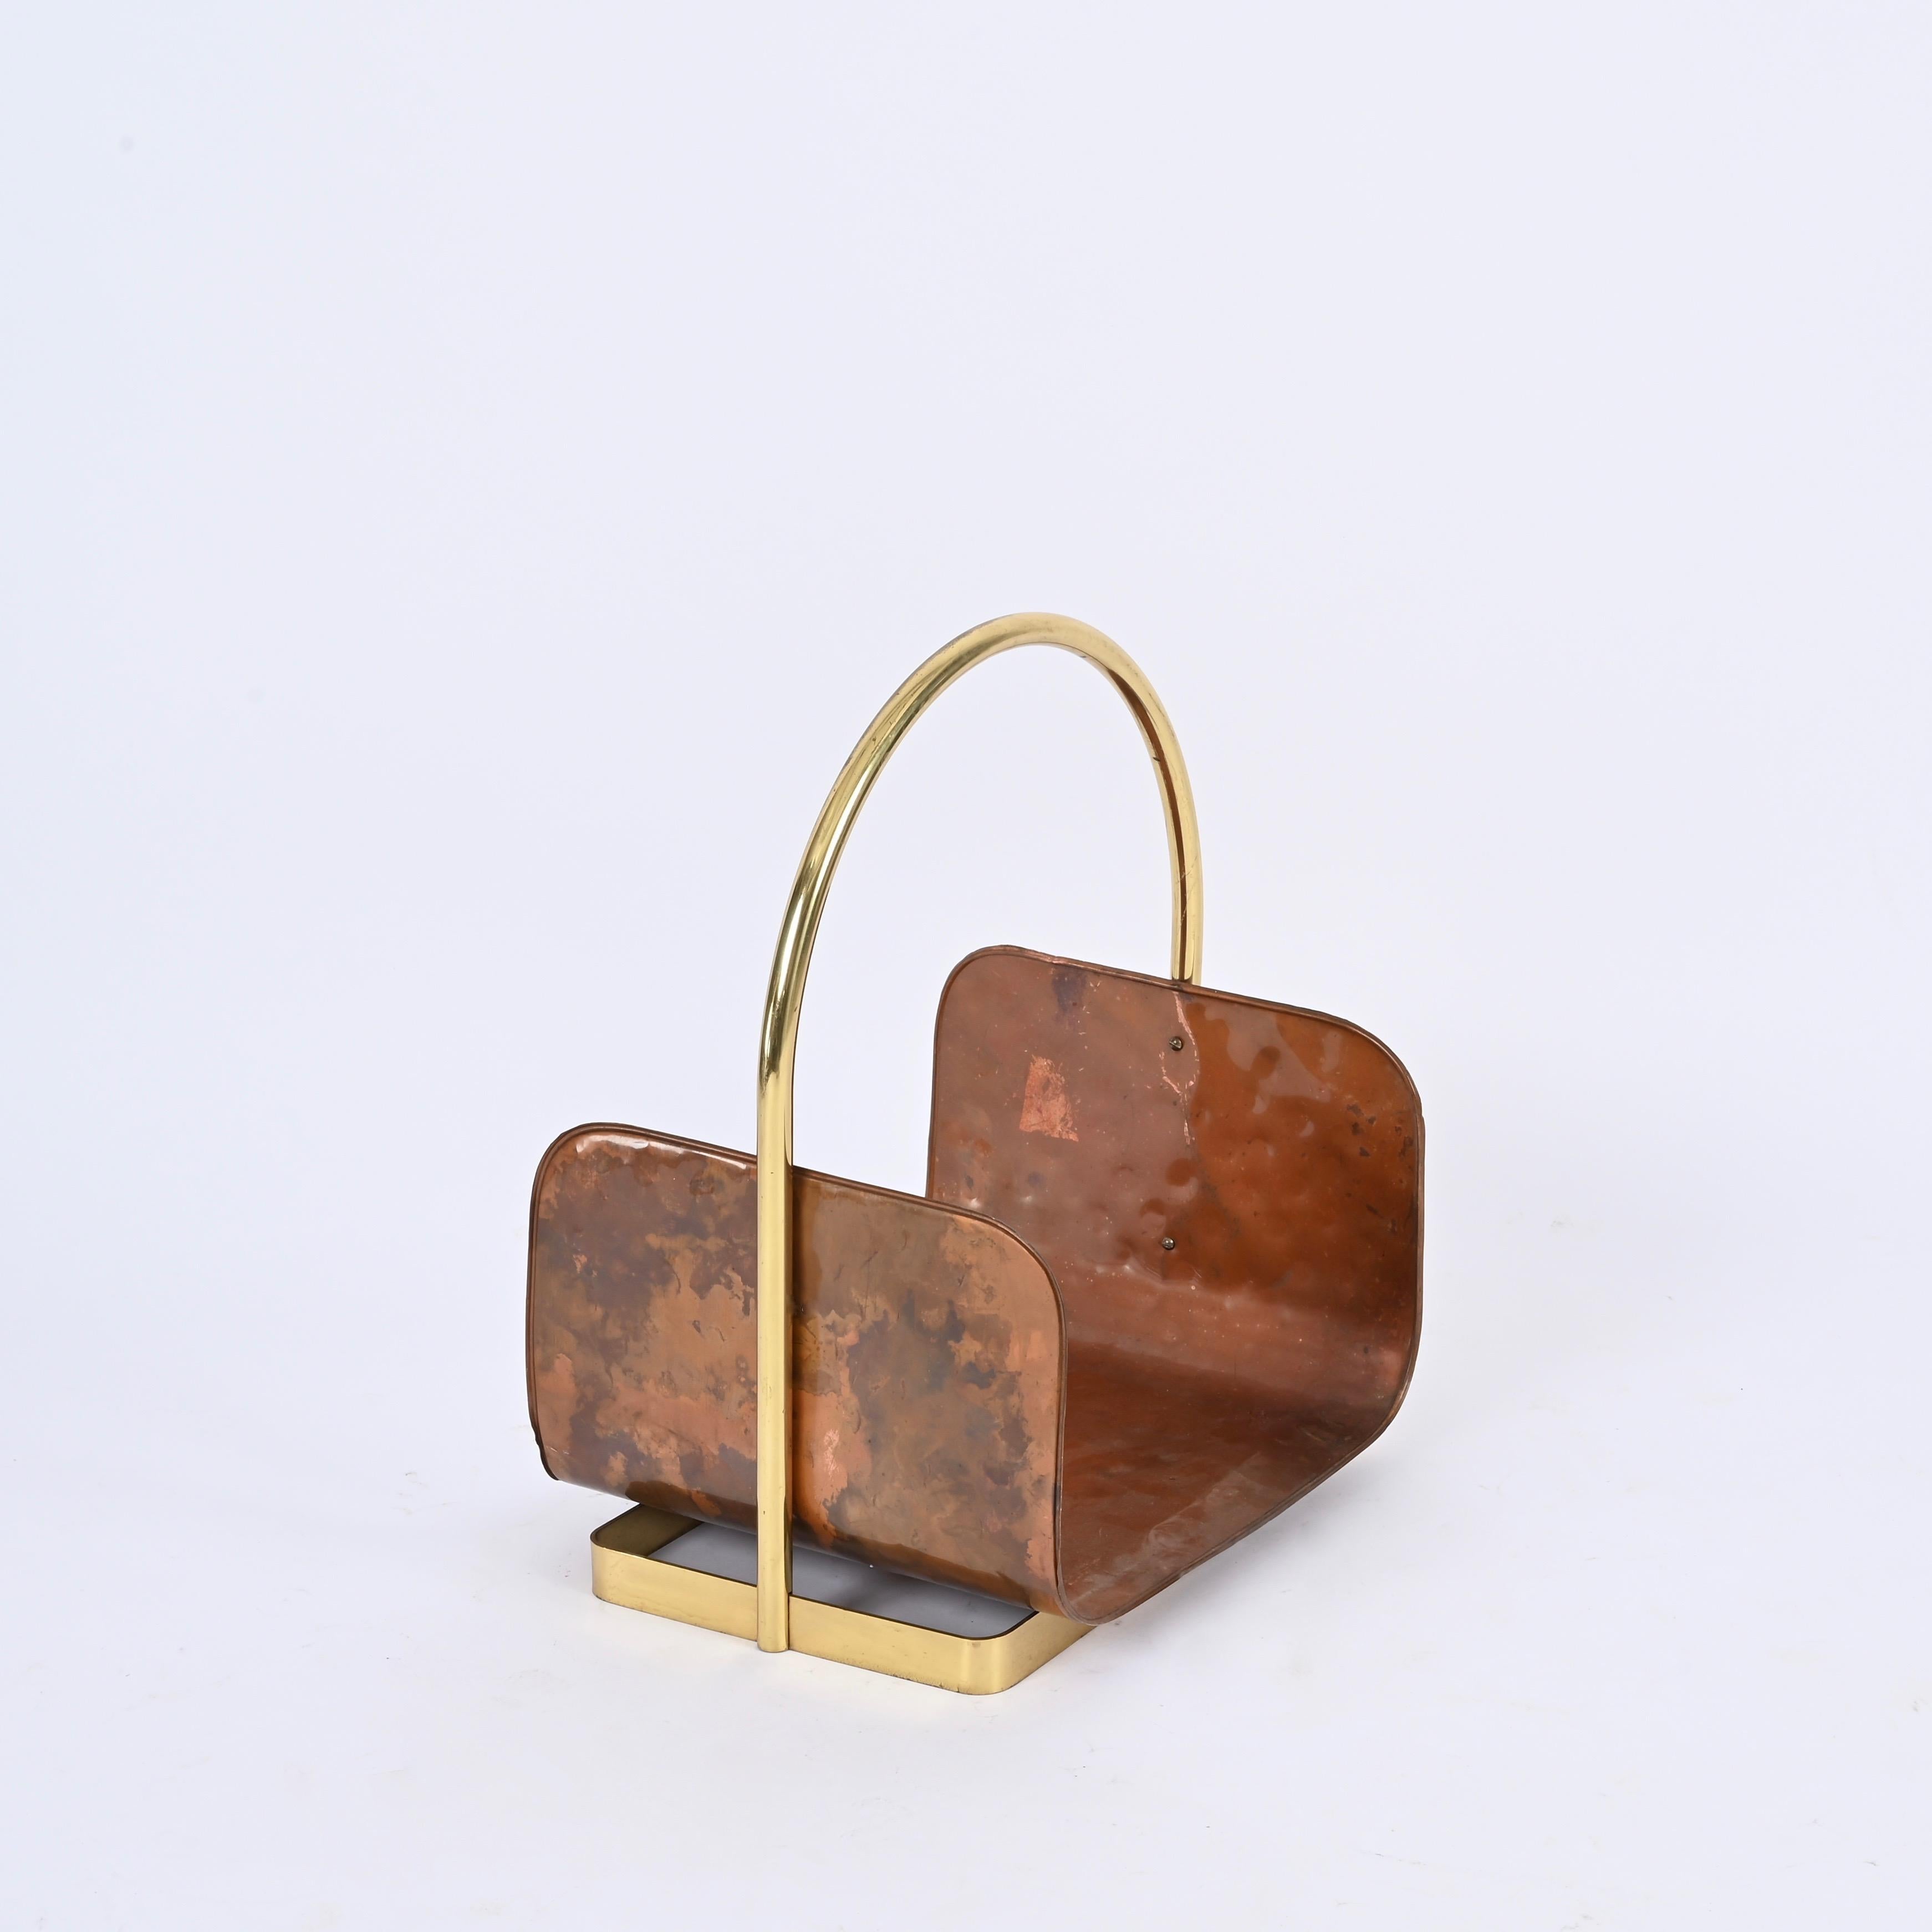 Midcentury Italian Magazine Rack in Hammered Copper and Brass, Italy 1970s For Sale 1